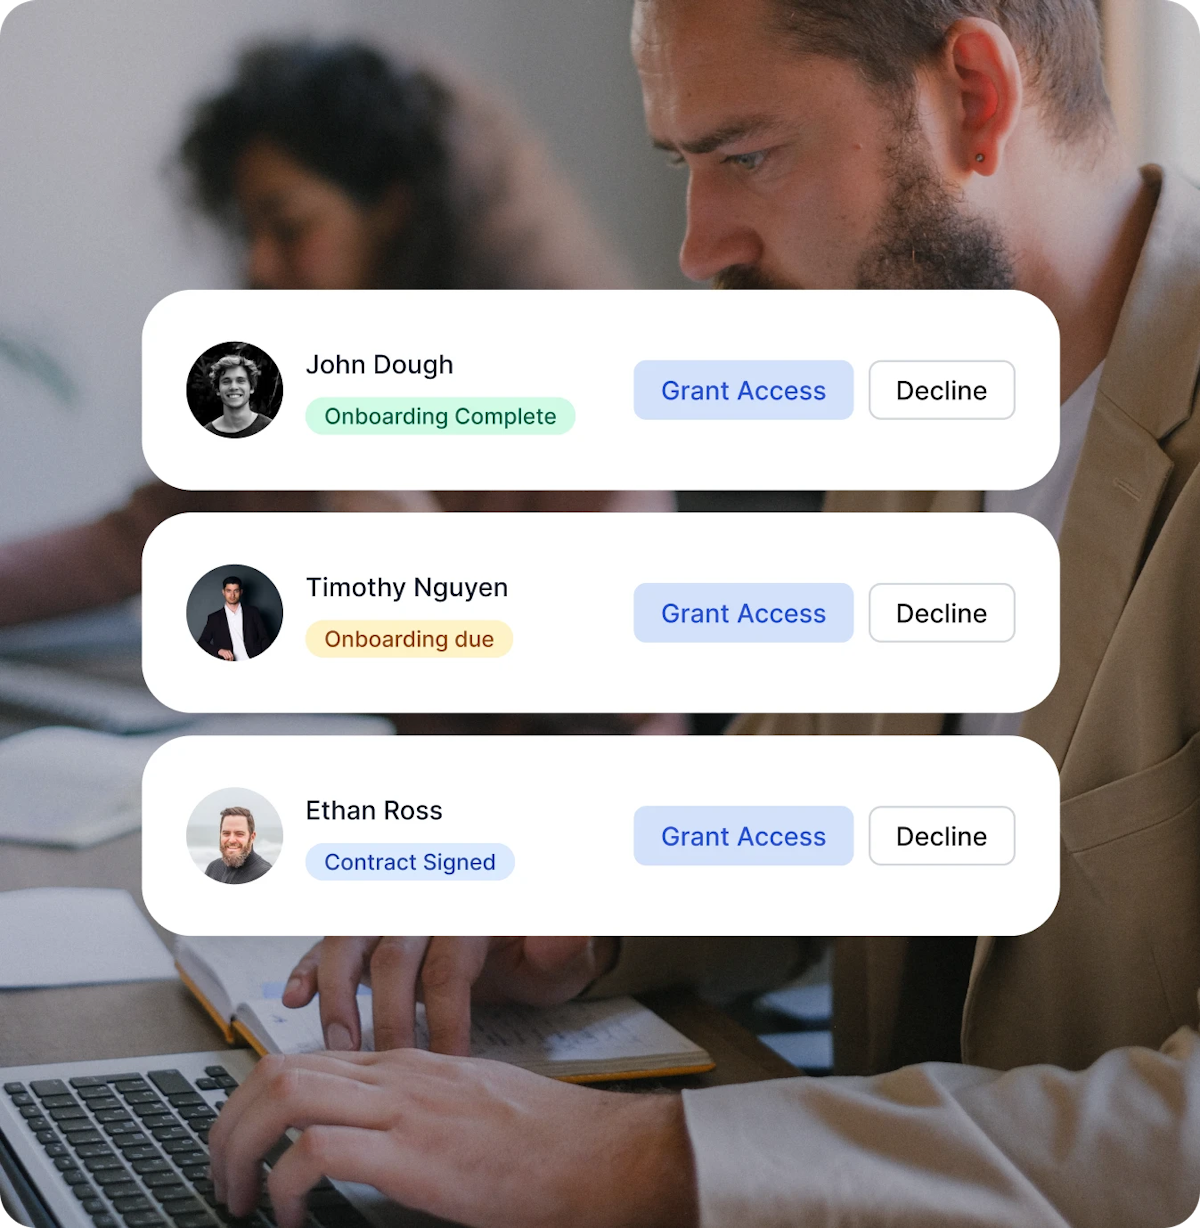 Automate your workflow and take your onboarding experience to the next level